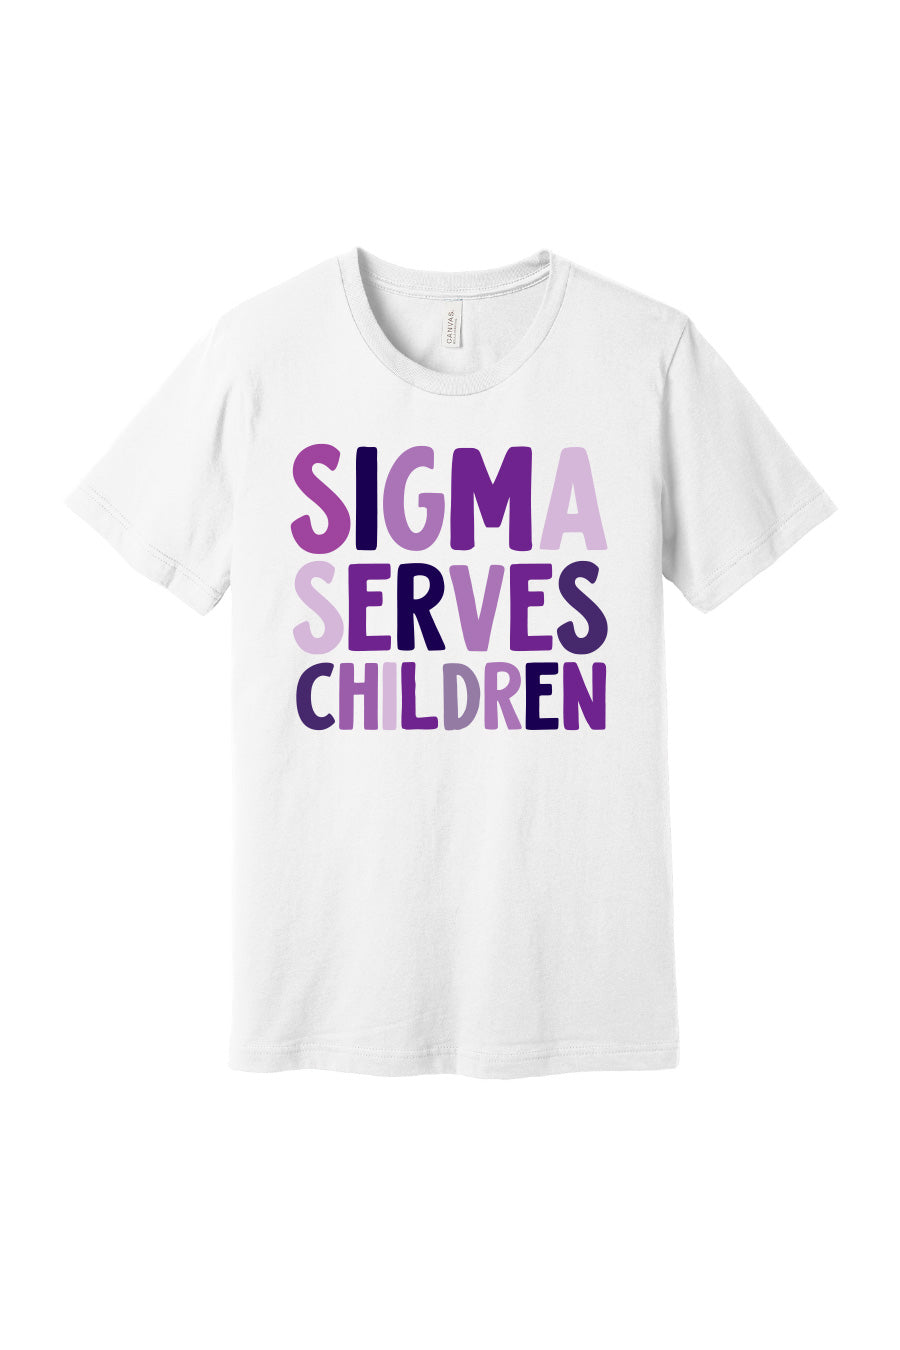 Load image into Gallery viewer, Sigma Serves Children Tee
